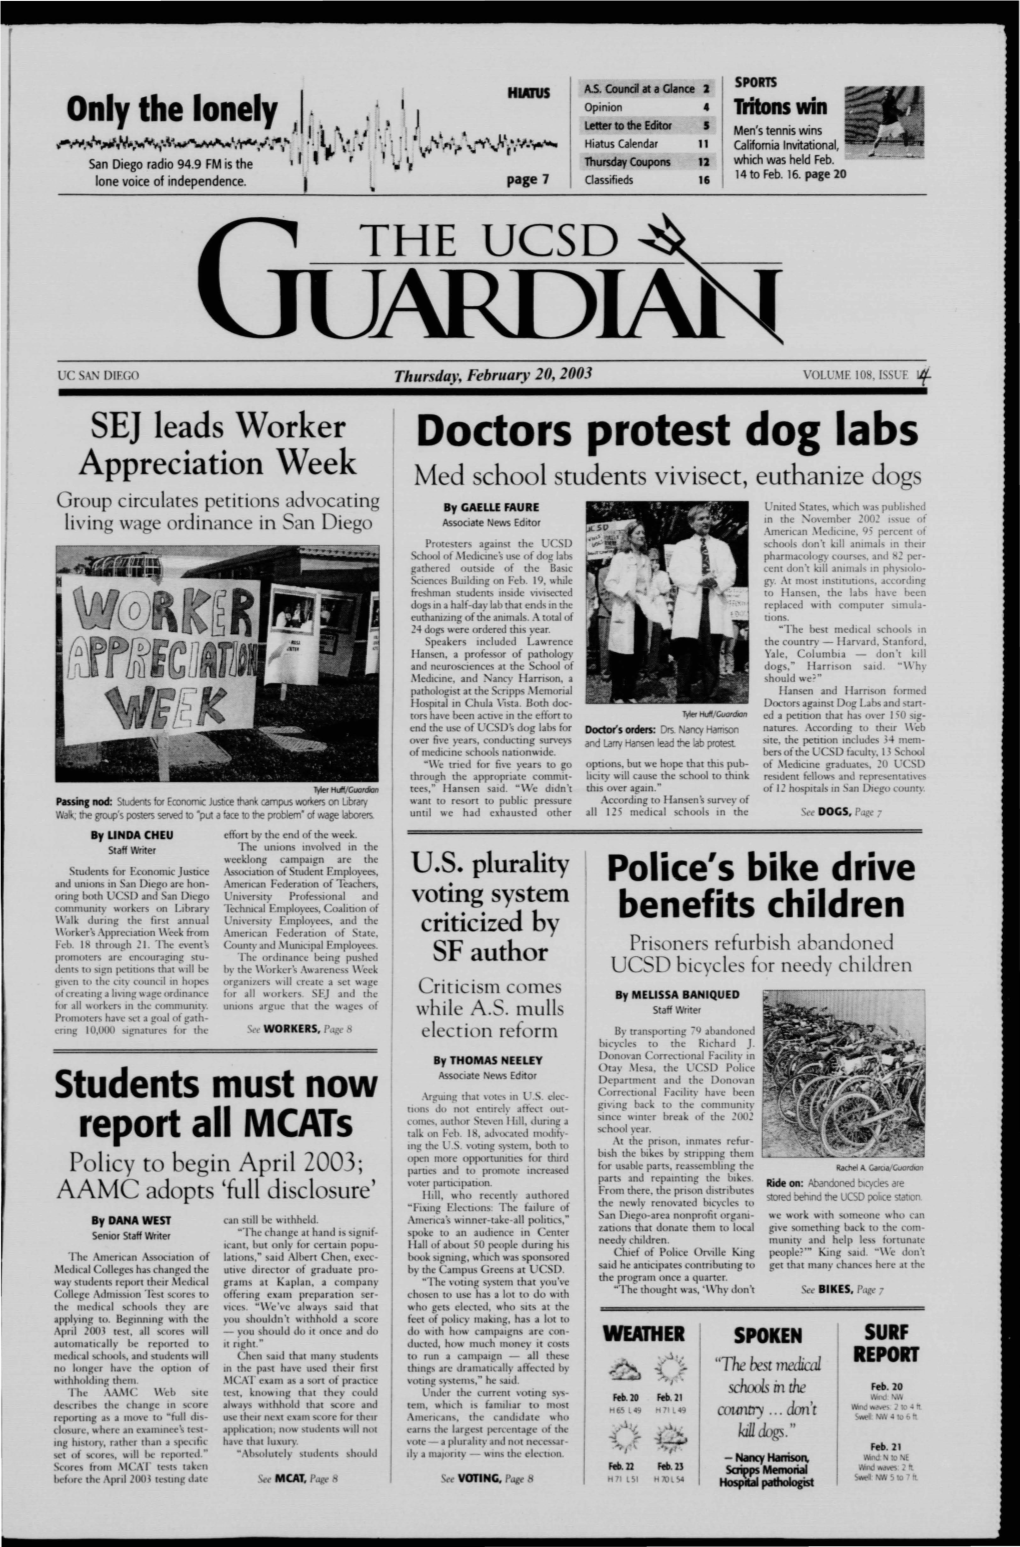 Doctors Protest Dog Labs Appreciation Week Med School Students Vivisect, Euthanize Dog